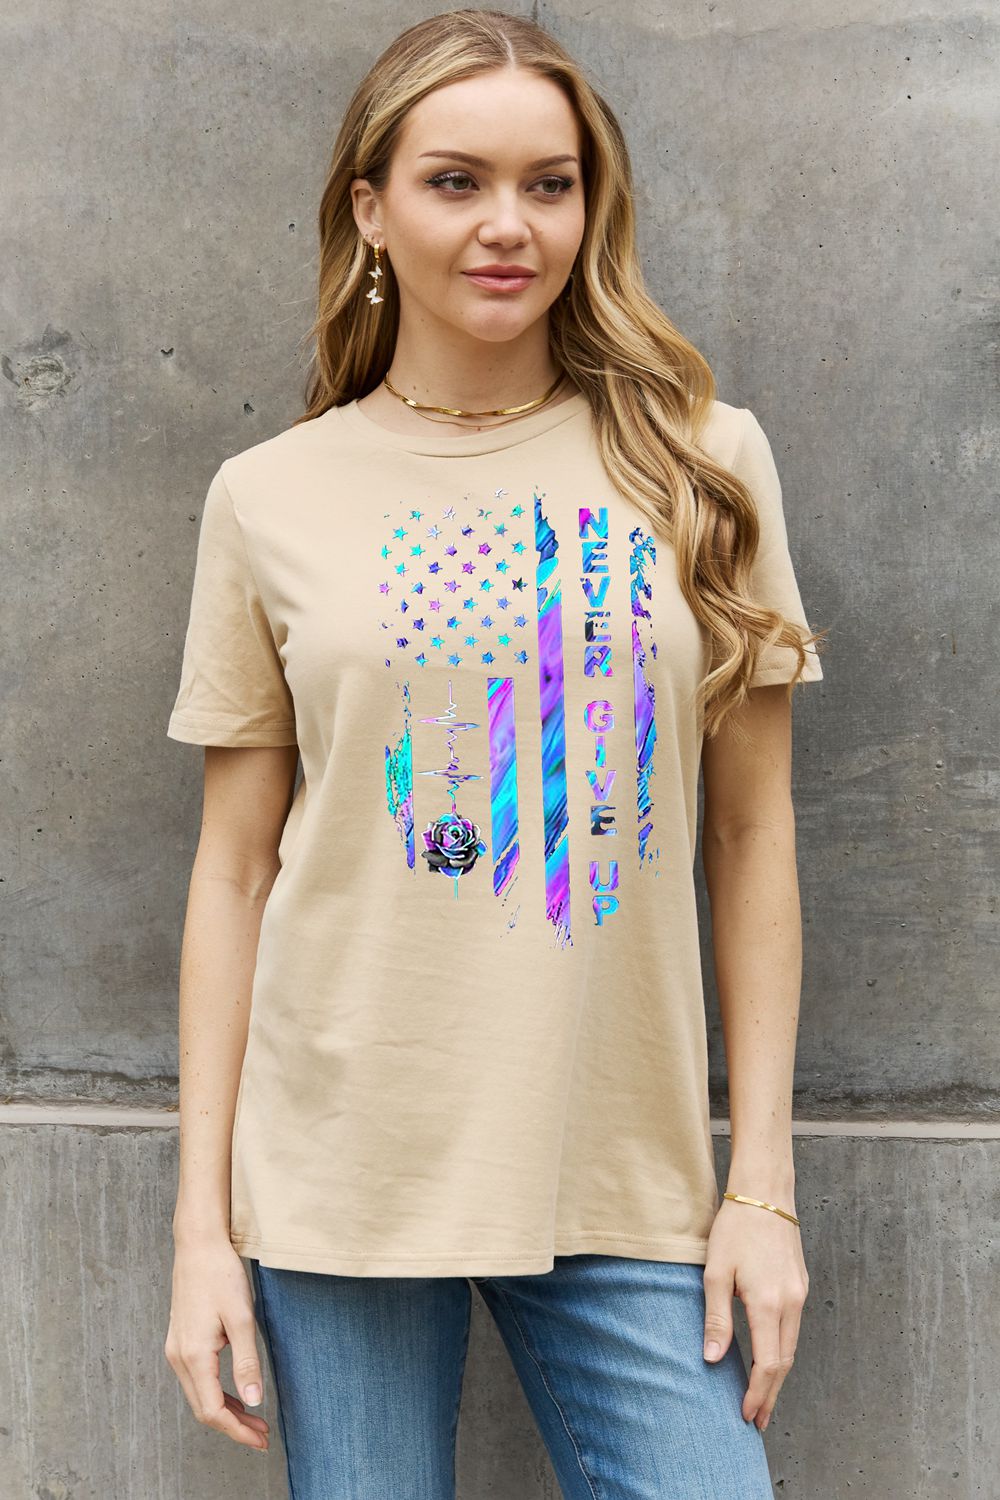 Simply Love NEVER GIVE UP Graphic Cotton Tee